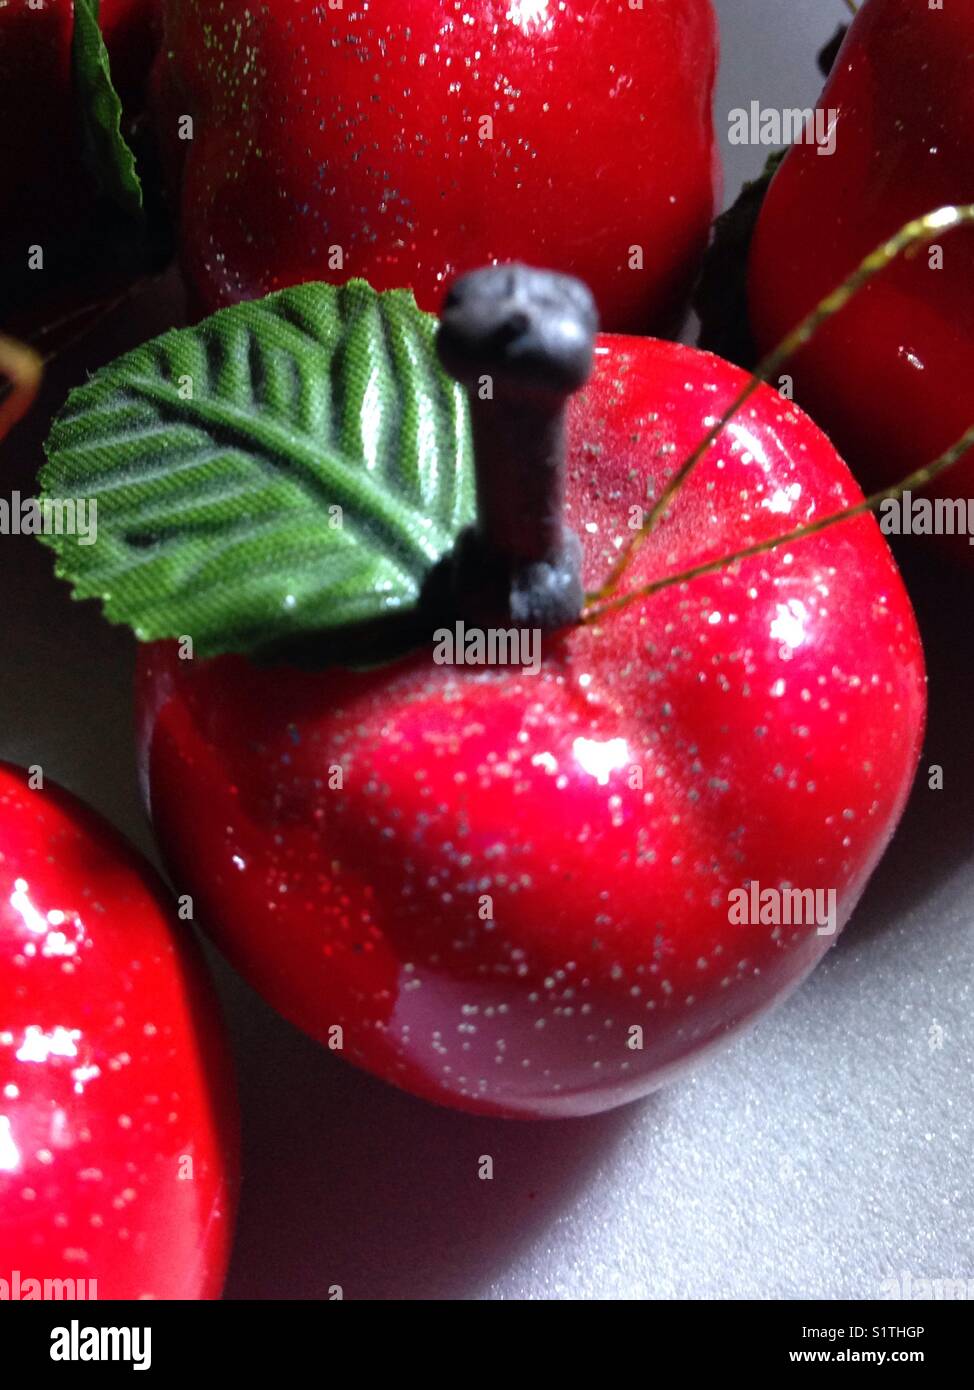 Close-up of Christmas apple ornament Stock Photo